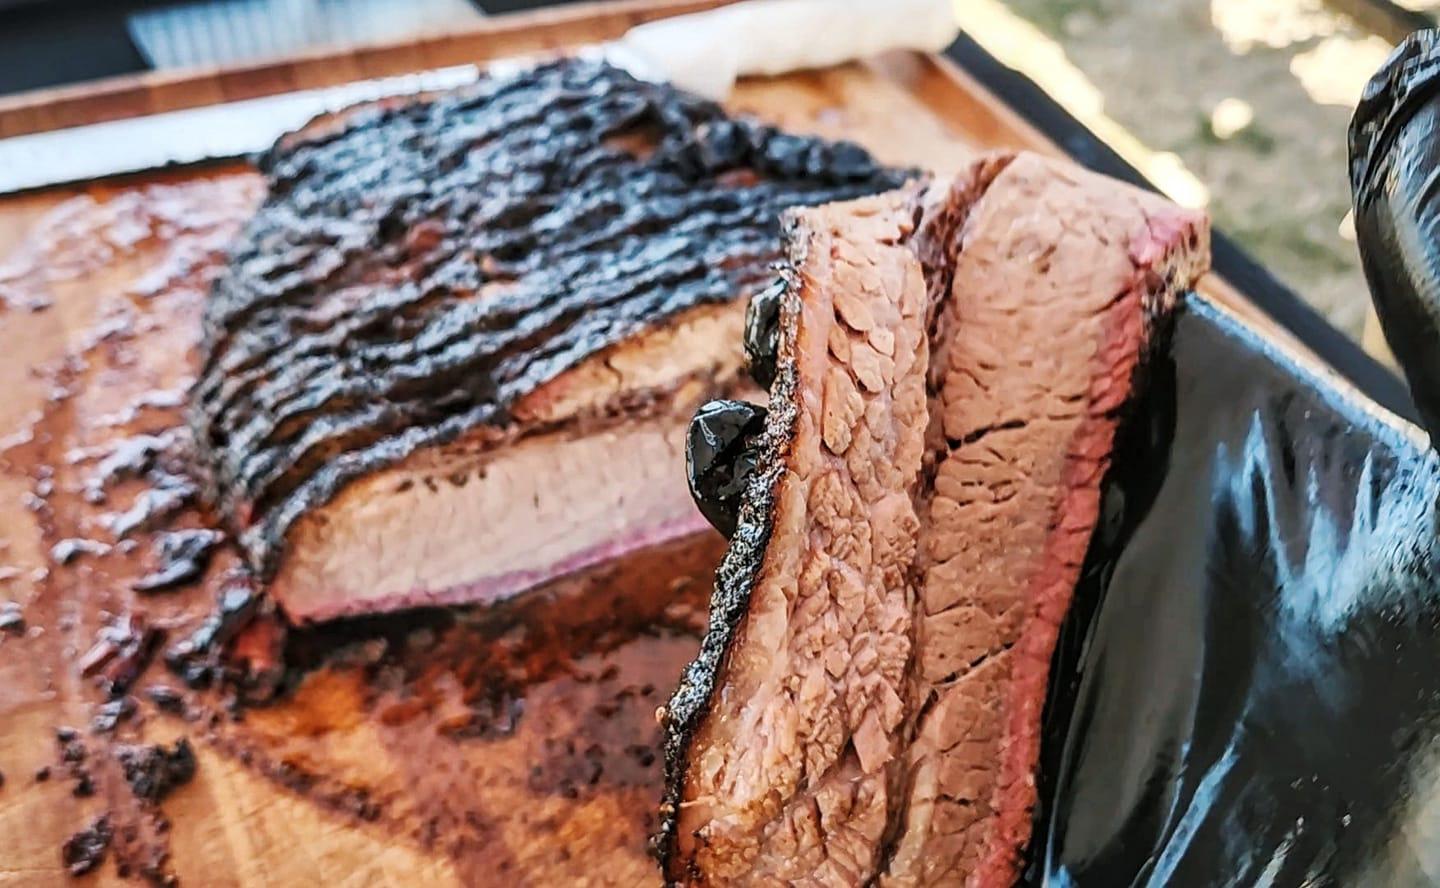 Texas barbecue restaurant robbed of $3,000 worth of brisket